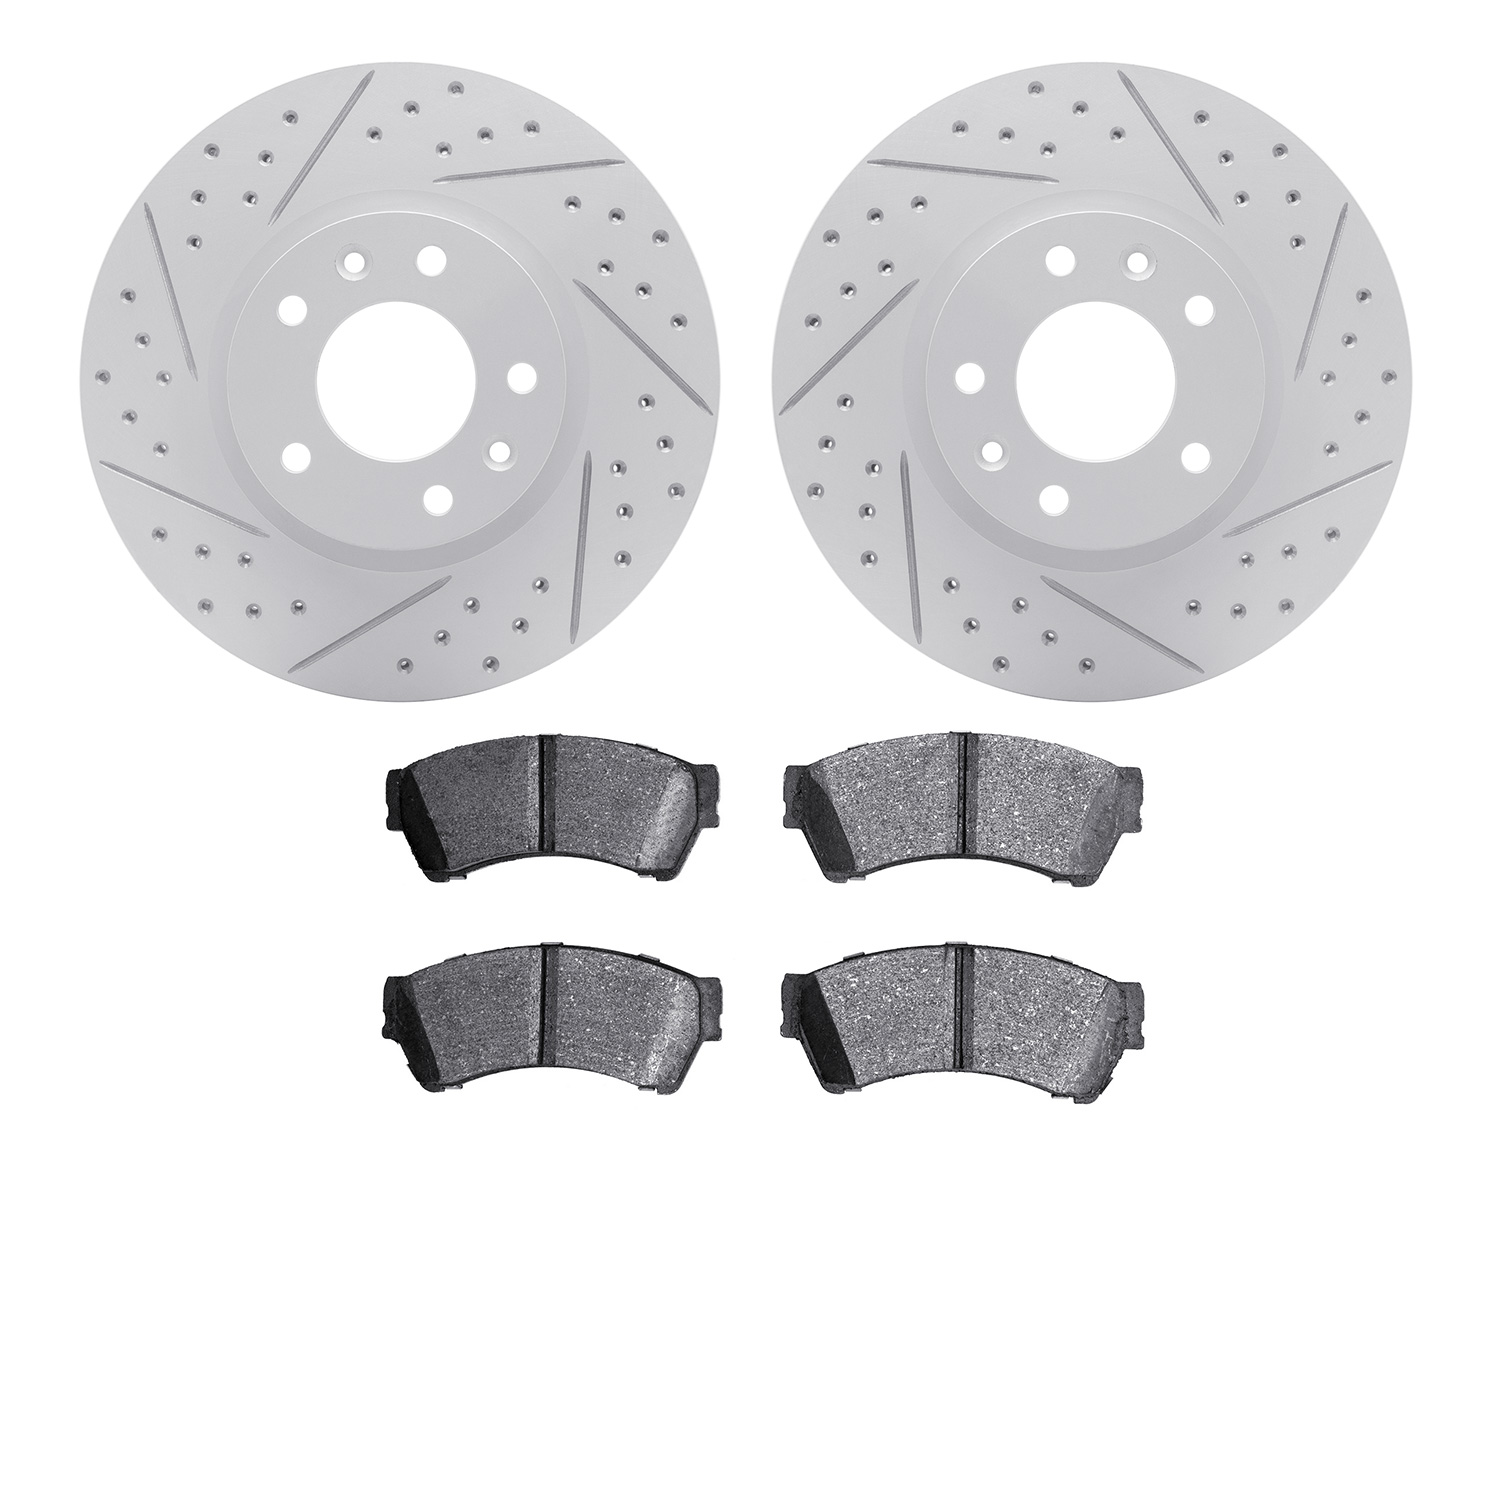 2502-54048 Geoperformance Drilled/Slotted Rotors w/5000 Advanced Brake Pads Kit, 2006-2012 Ford/Lincoln/Mercury/Mazda, Position: